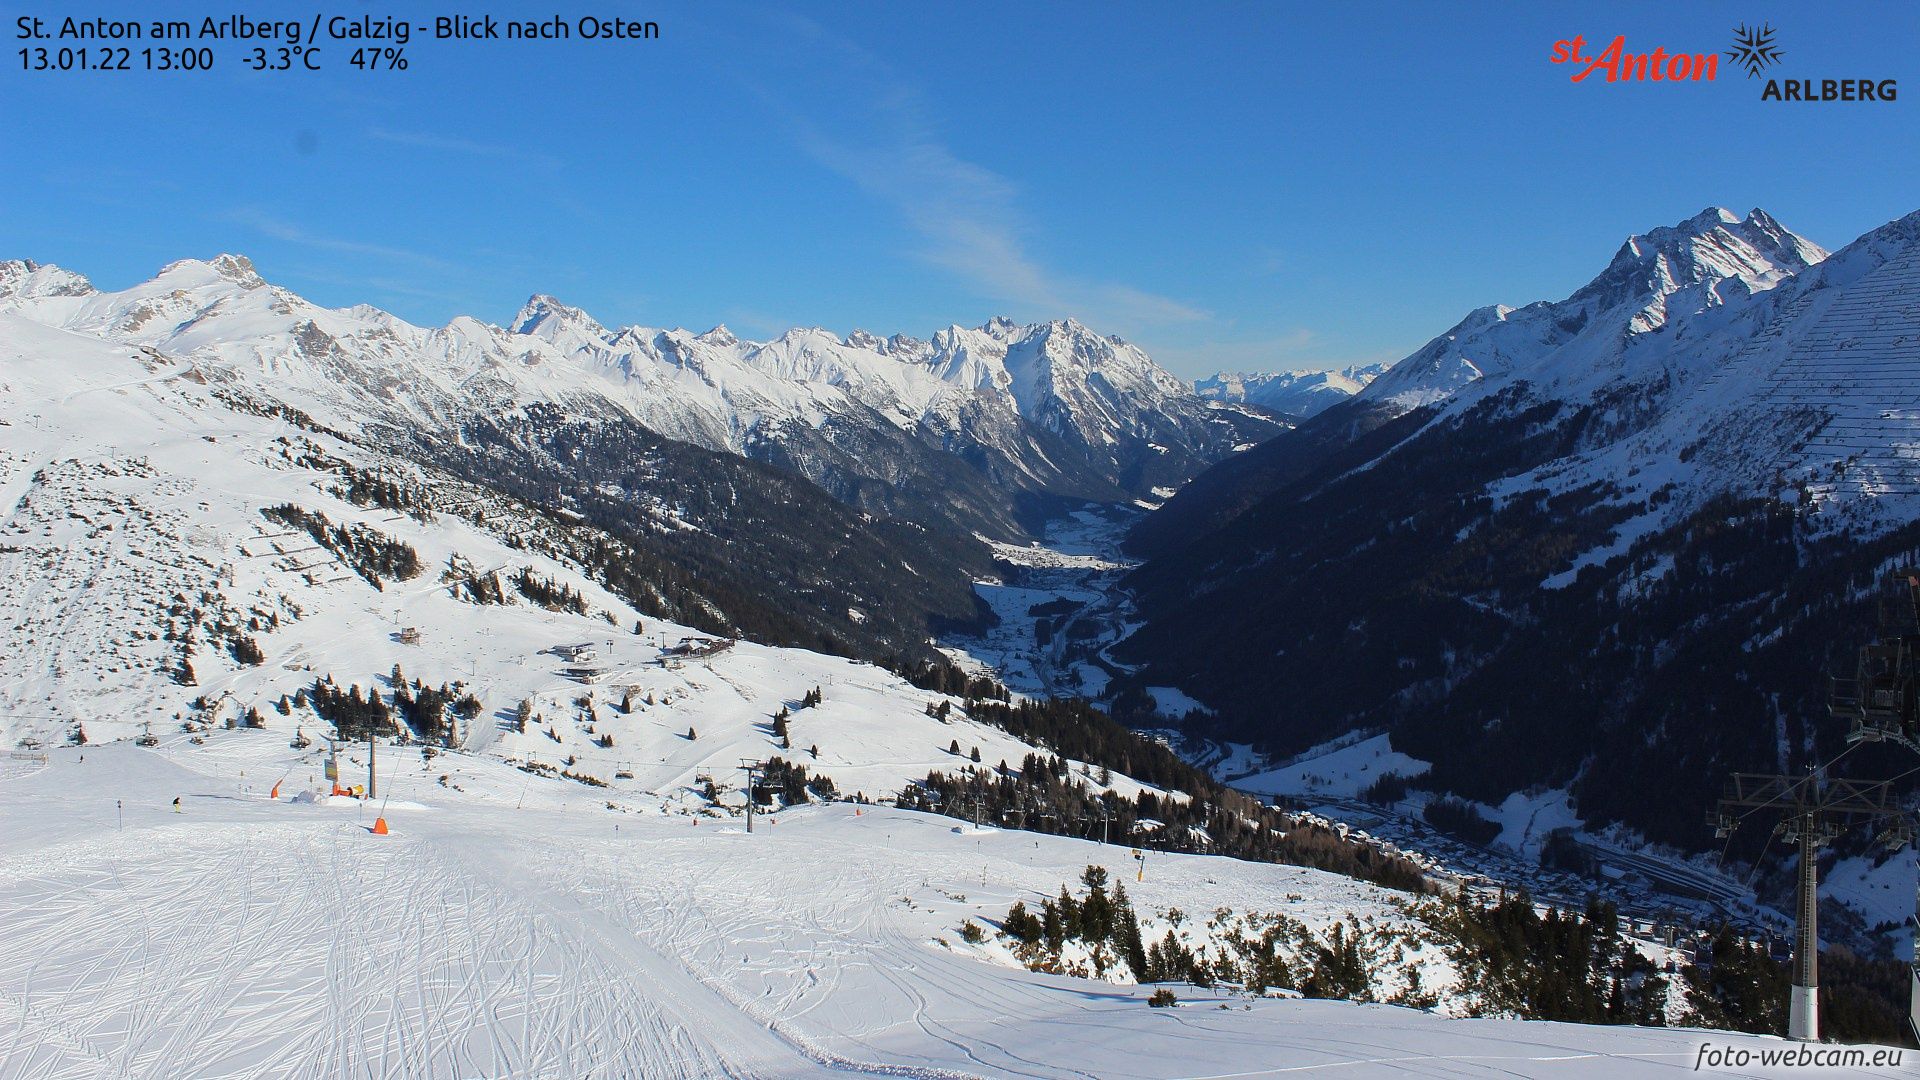 Sunny and dry everywhere in the Alps (foto-webcam.eu)